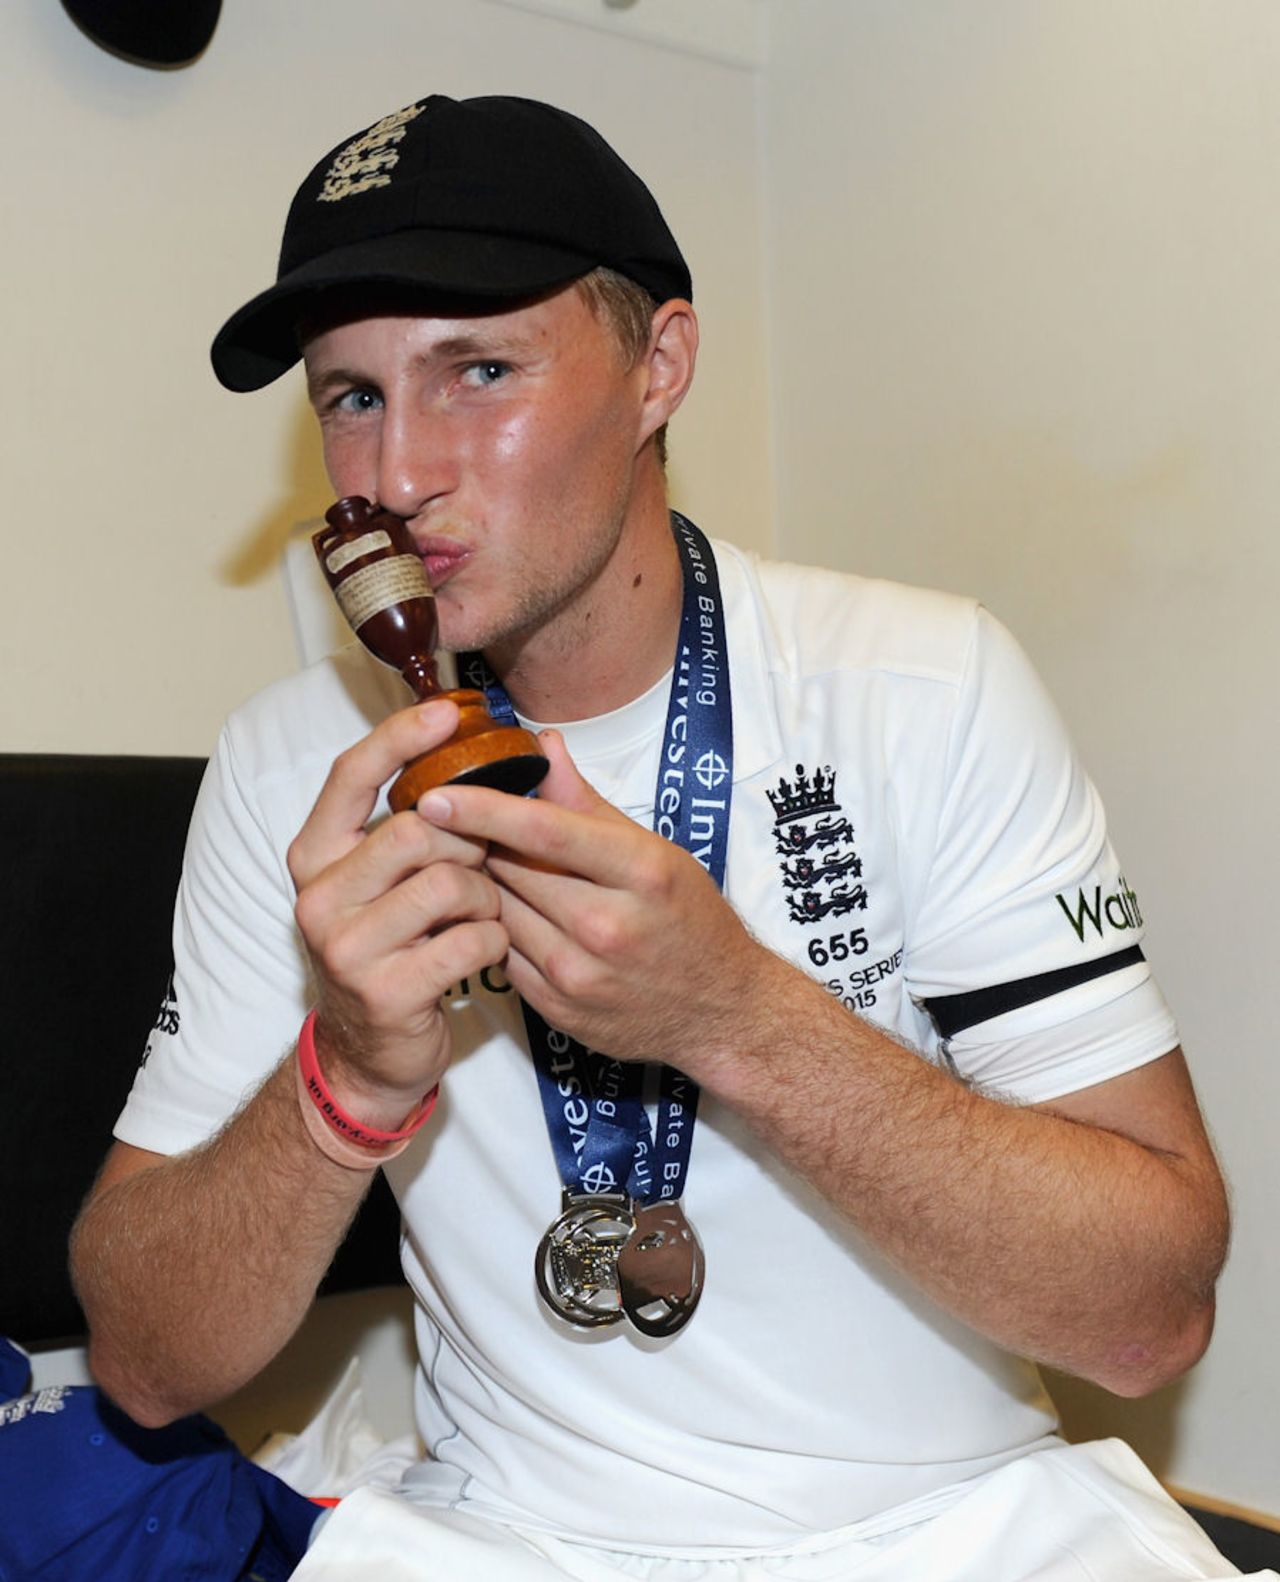 Joe Root, England's Man of the Series, in the 2015 Investec Ashes, poses with the urn after the final Test at The Oval